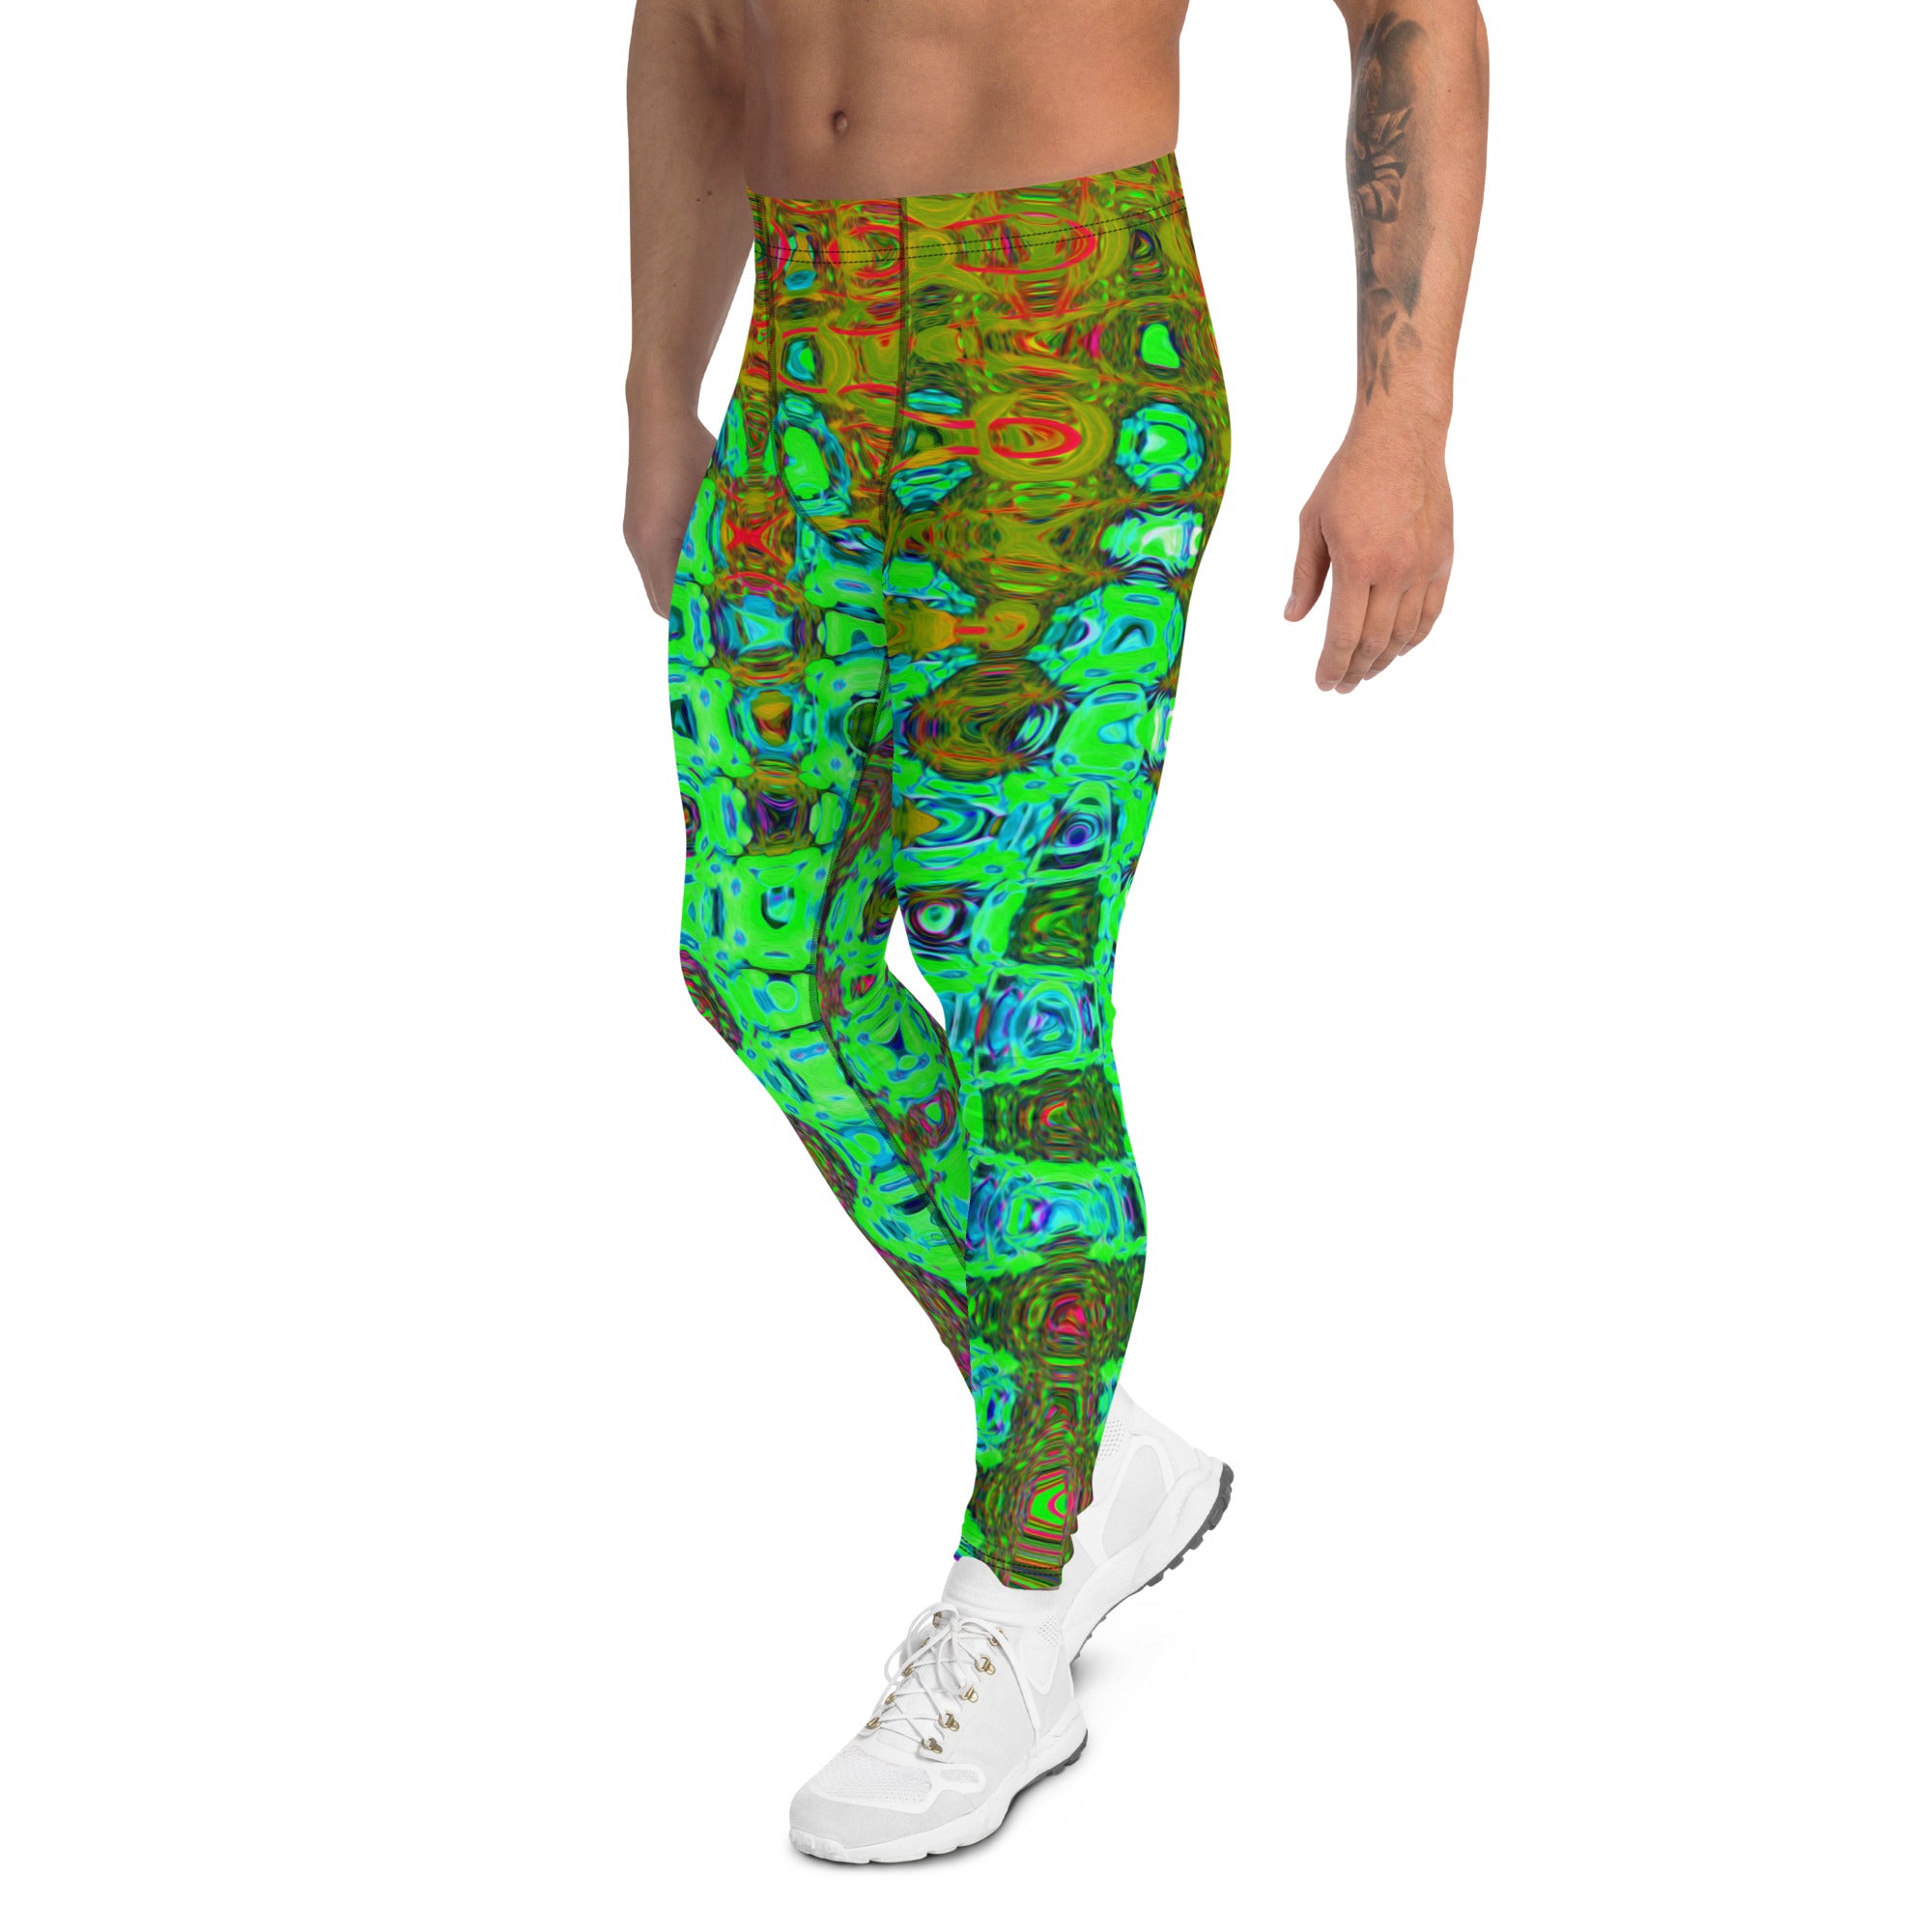 Men's Leggings | Wavy Abstract Lime Green Retro Mosaic Zigzags